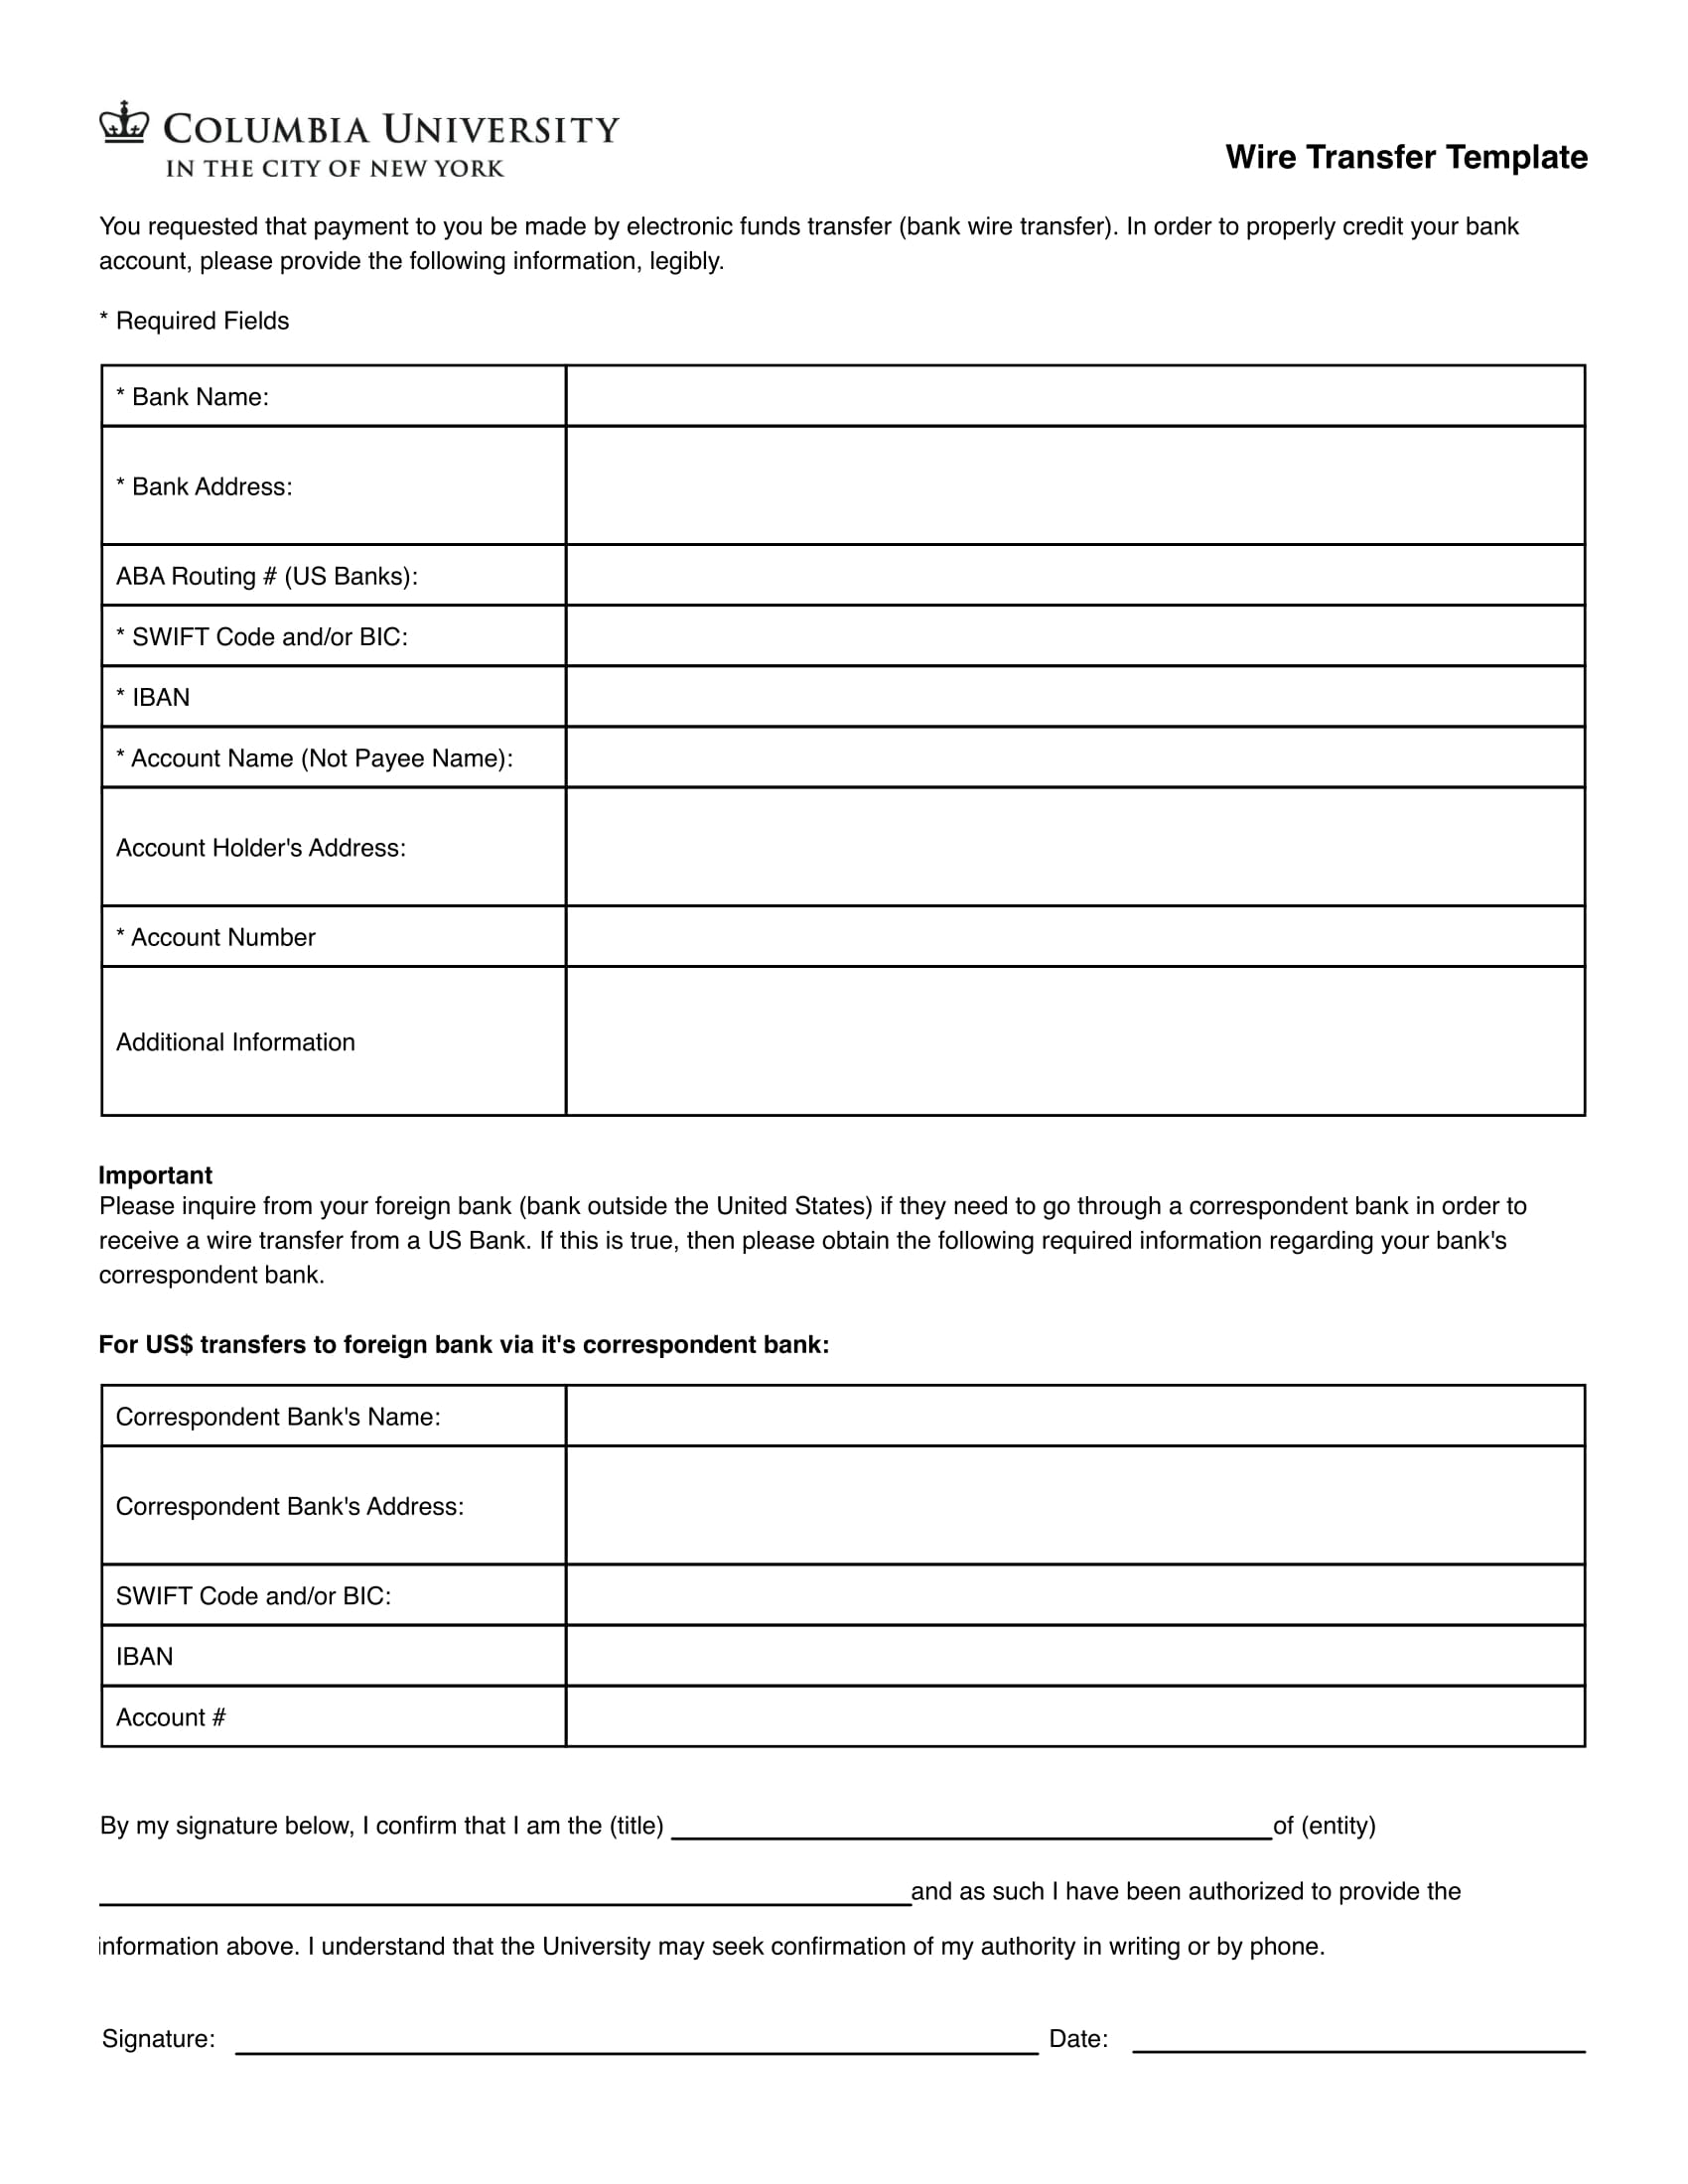 wire transfer template form 1